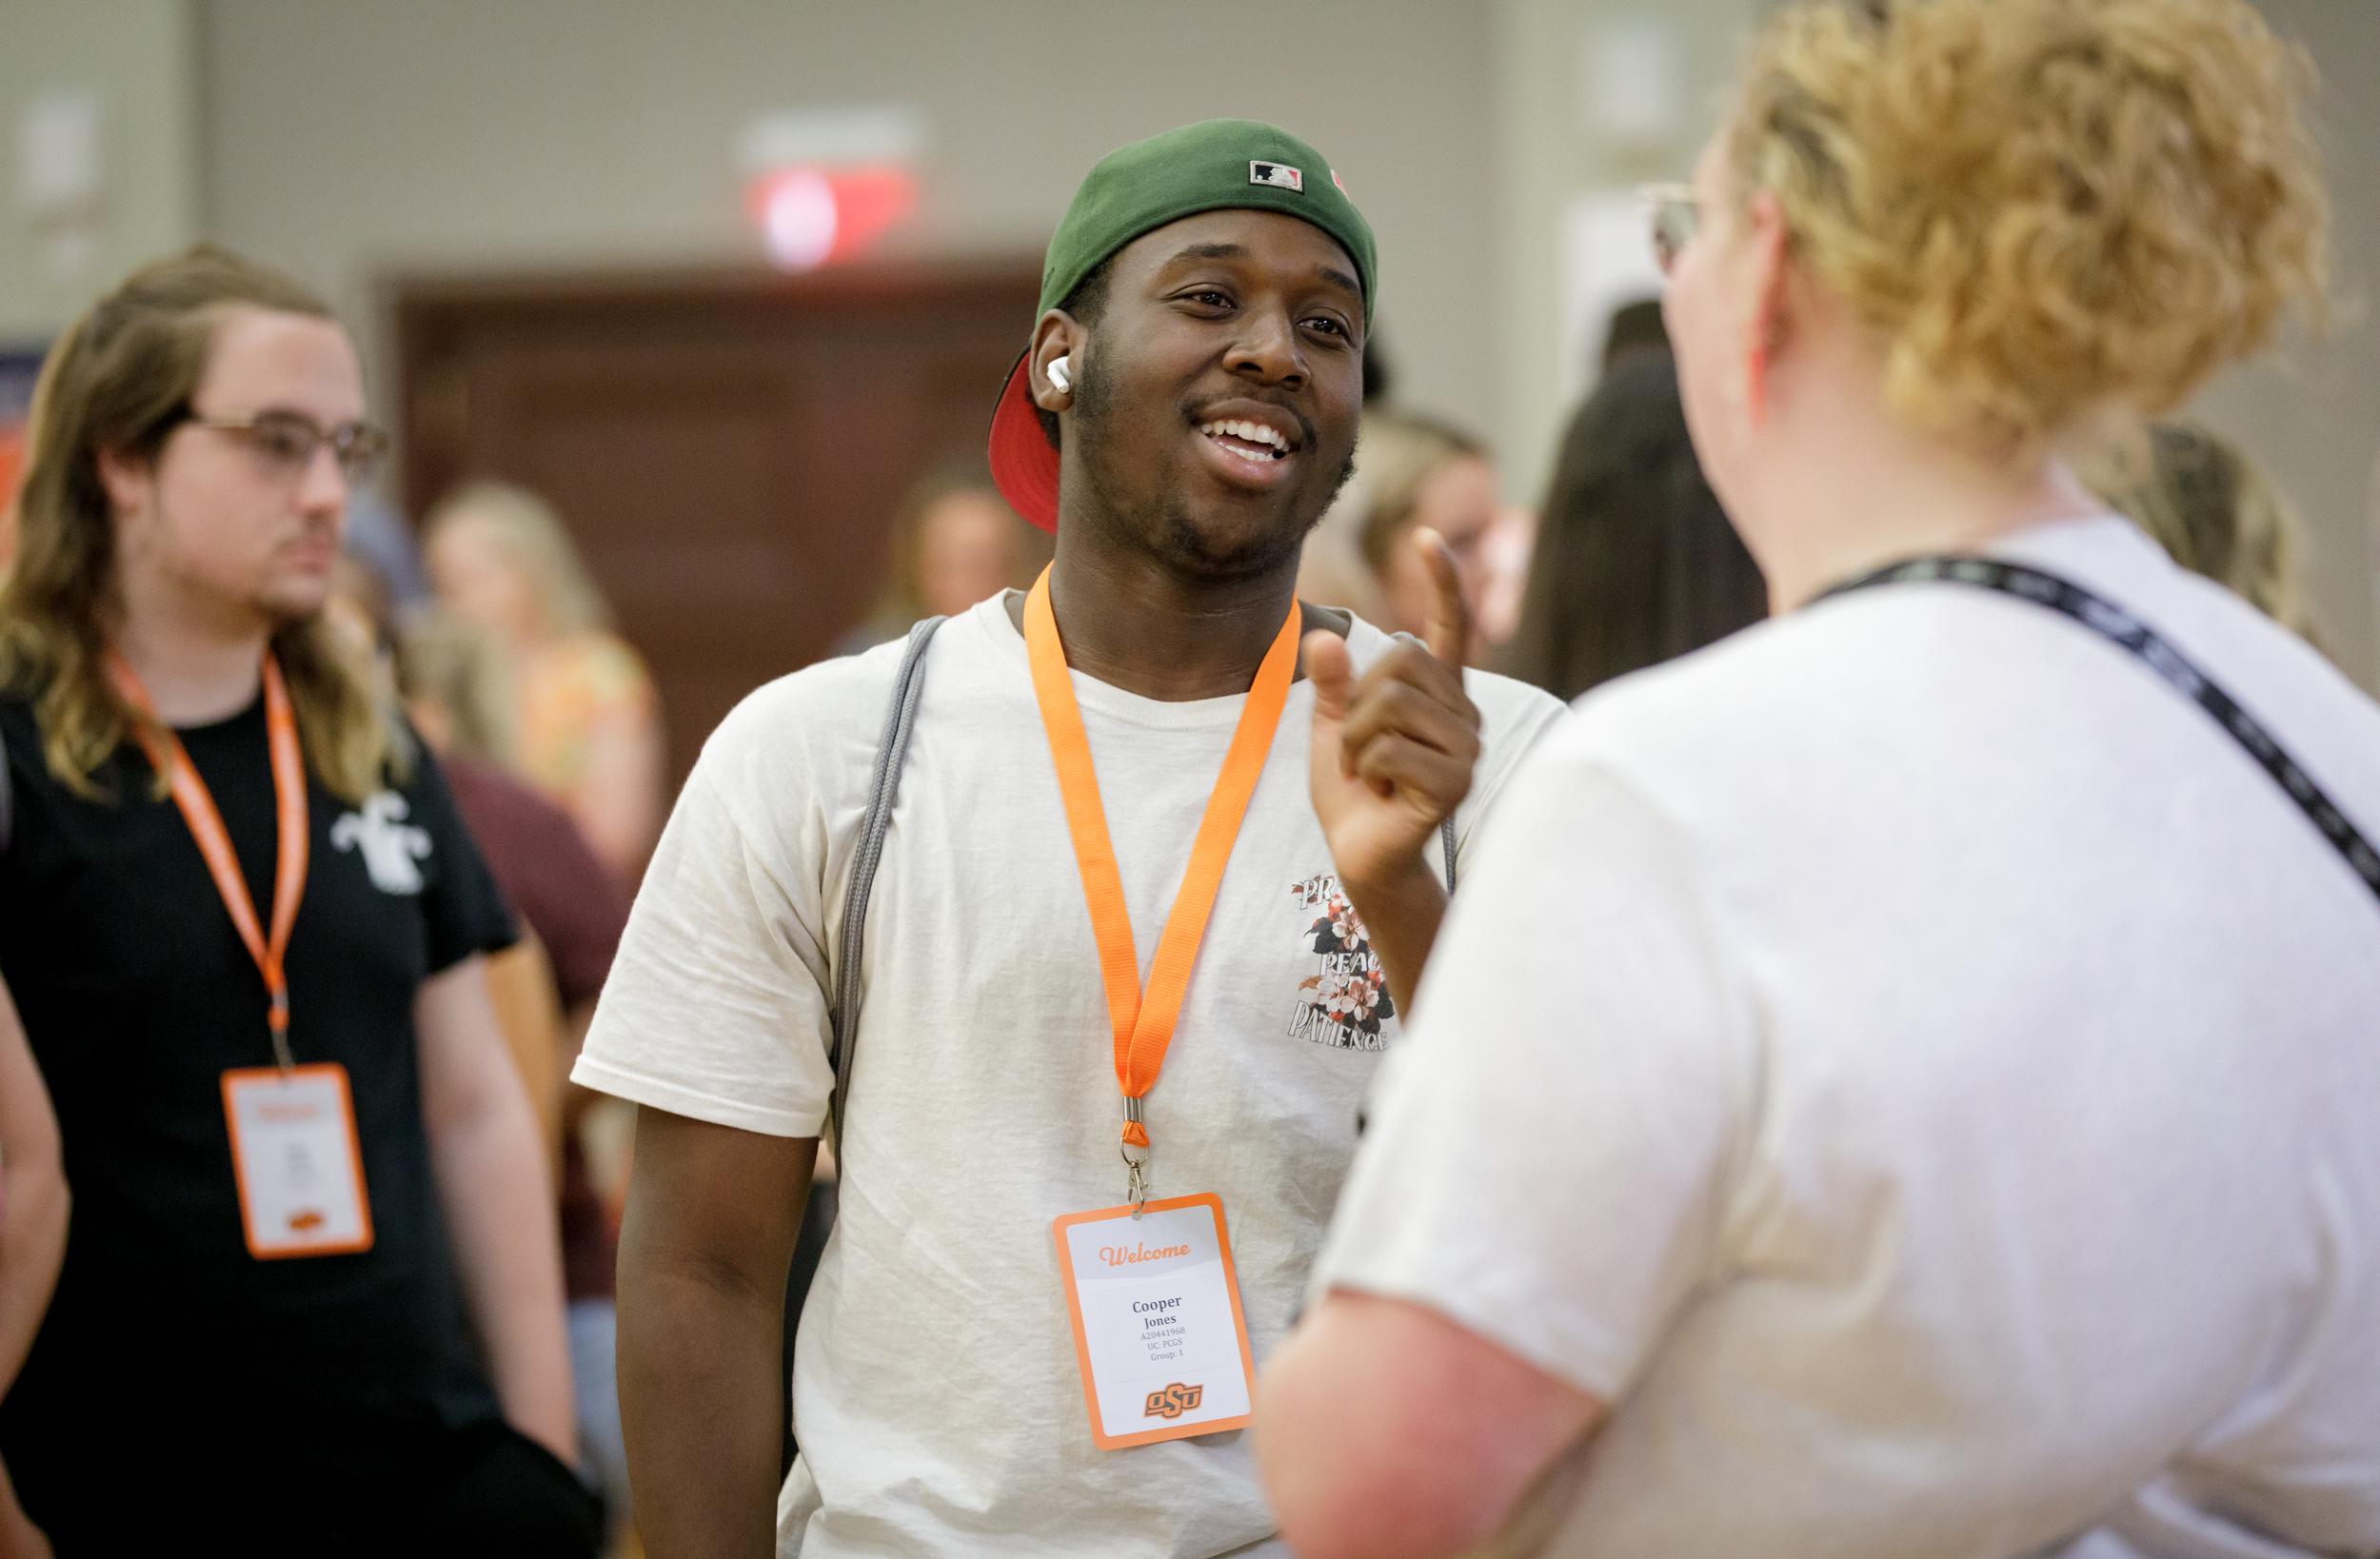 A man smiling and talking to a woman at an OSU event